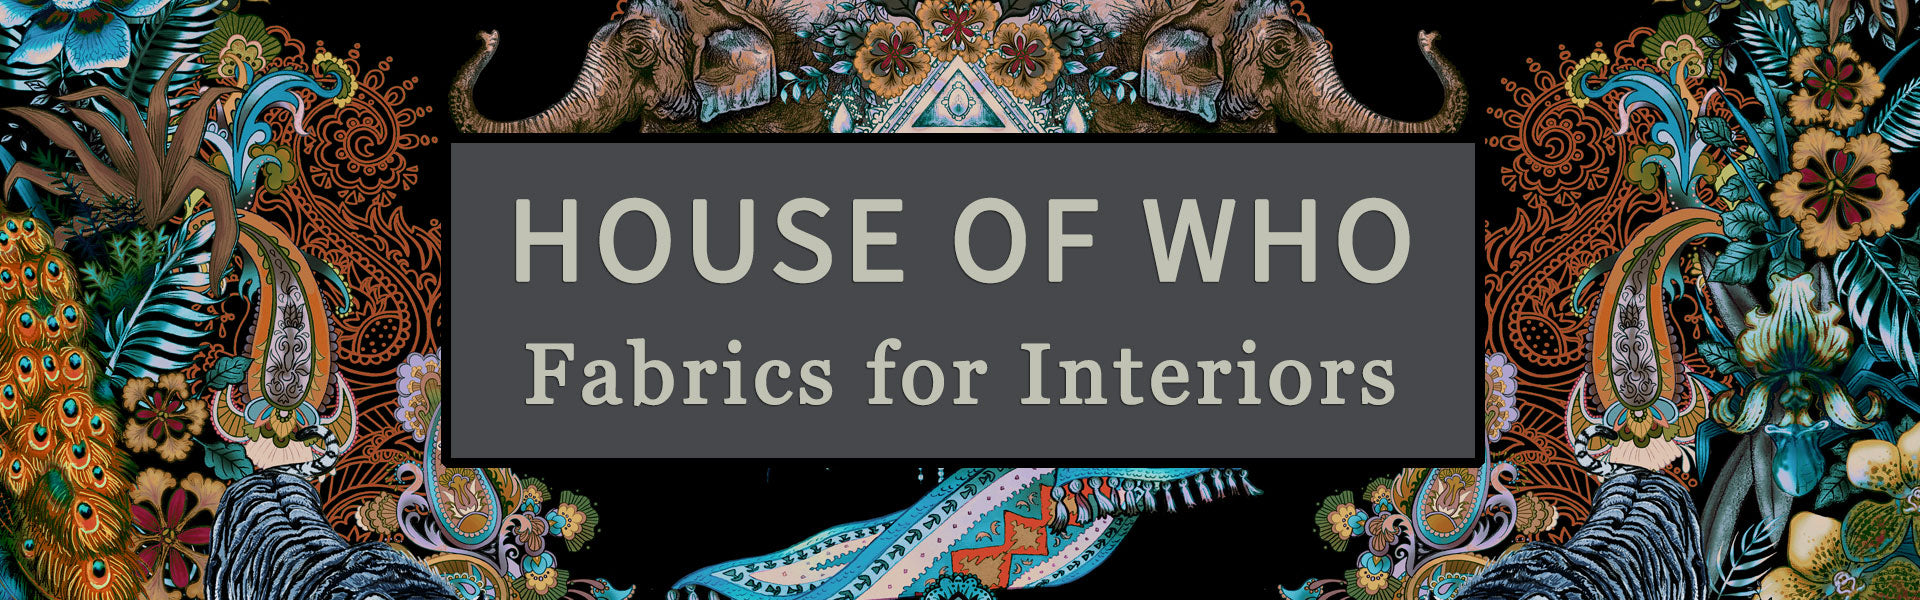 Designer Fabrics for Interiors, House Of Who Collection for Upholstery, Curtains and Soft Furnishings by Becca Who